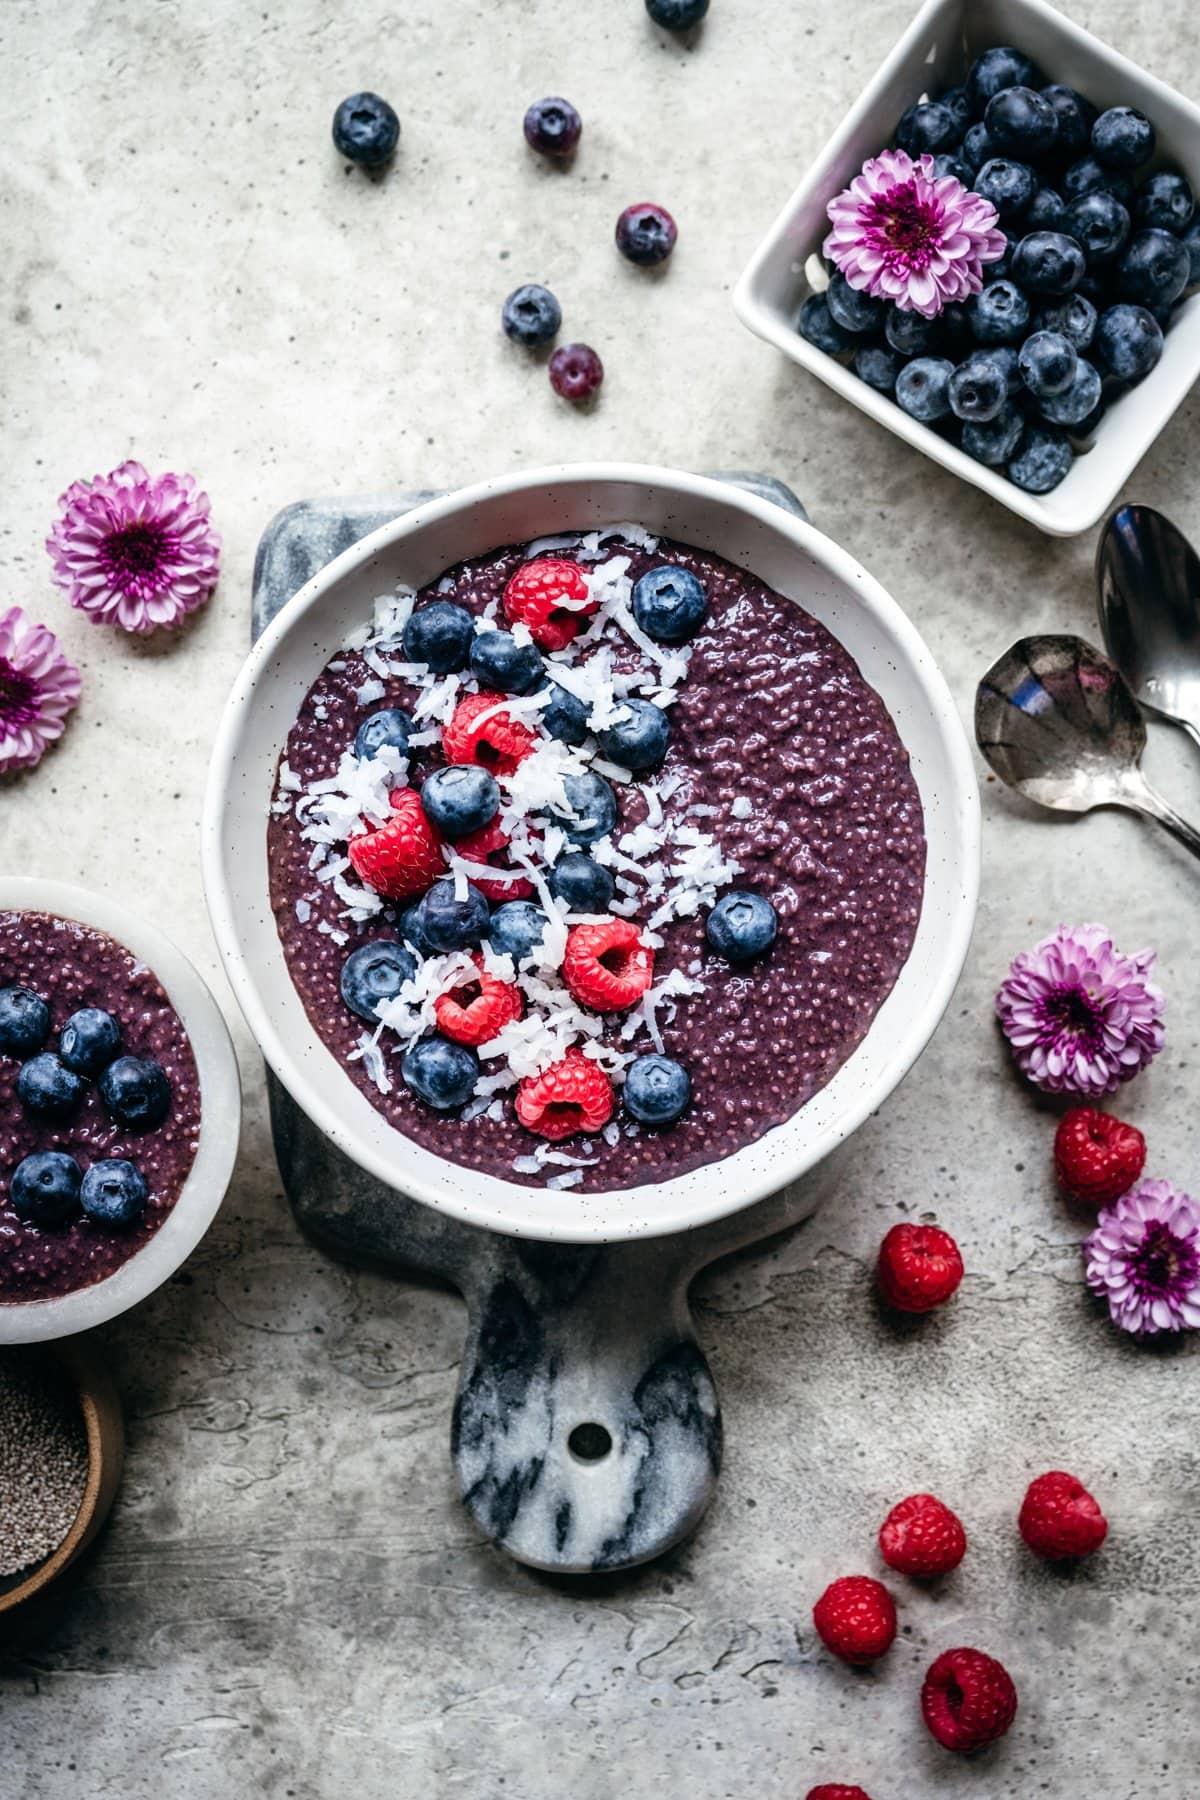 Overhead view of blueberry chia pudding in a bowl.